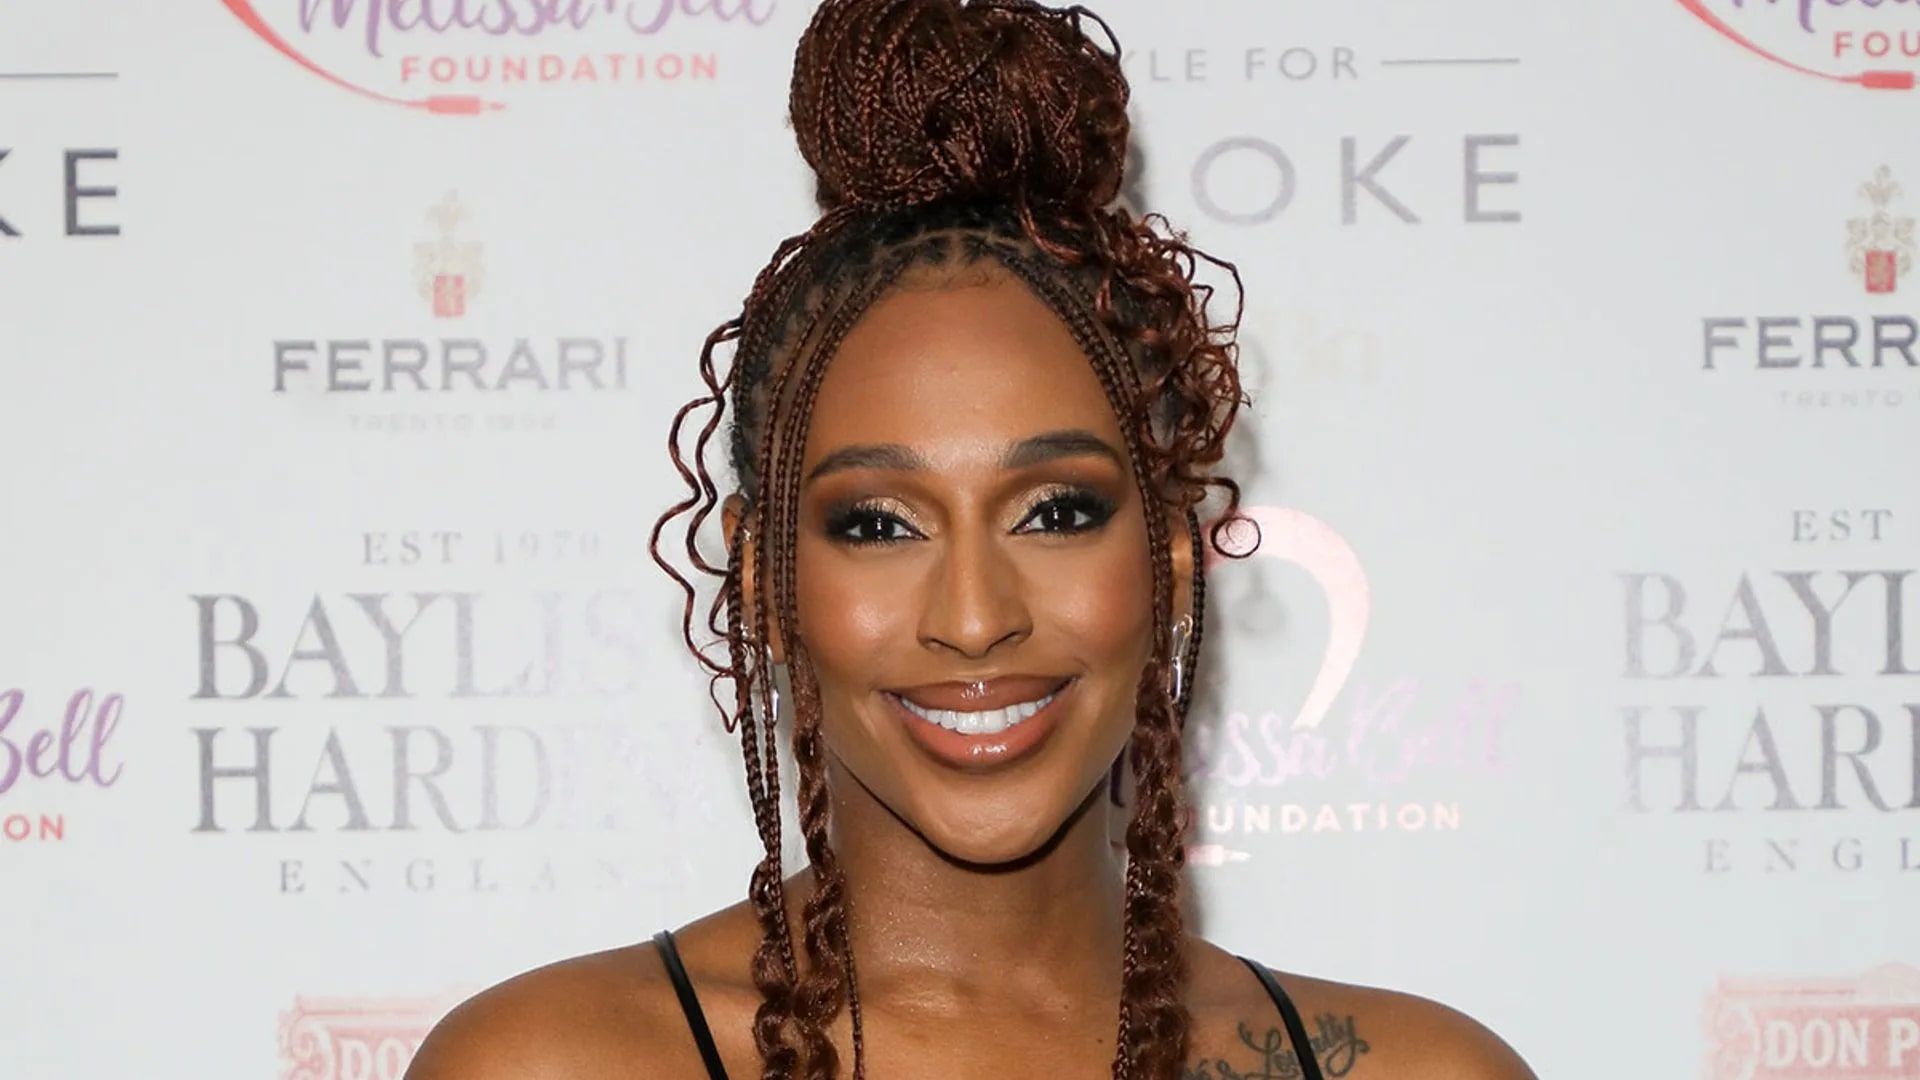 10 Interesting Facts About Alexandra Burke You Didn’t Know